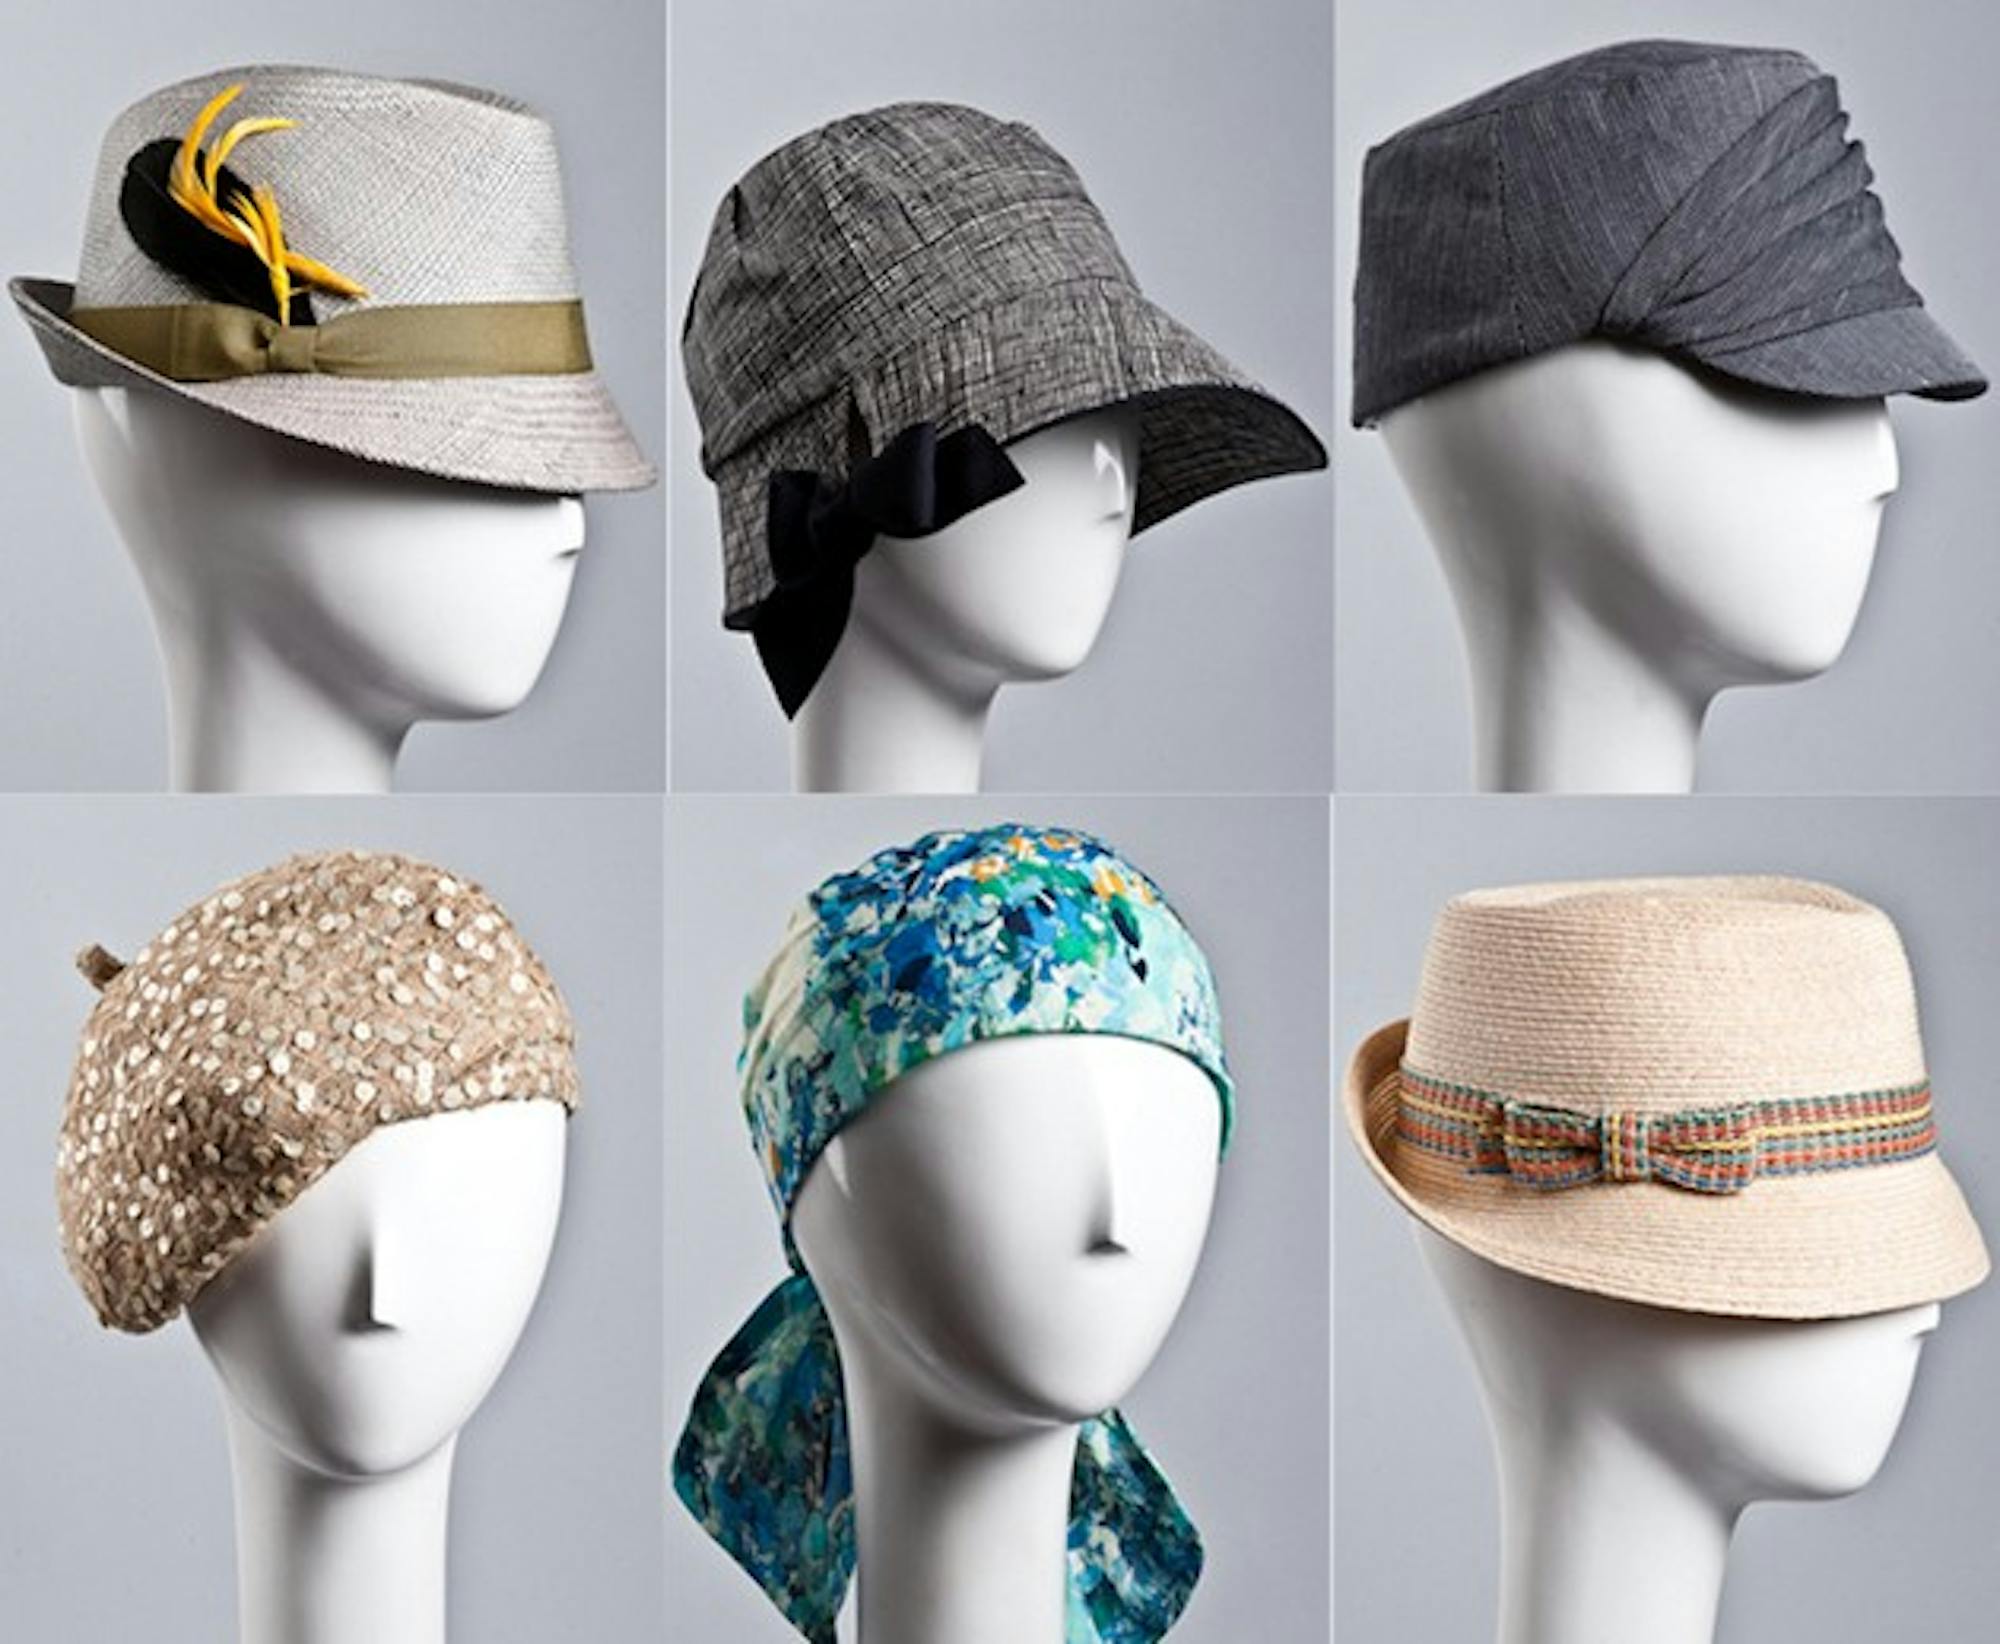 Eugenia Kim's current collection consists of a variety of straw and woven hats, in addition to headbands and wraps.